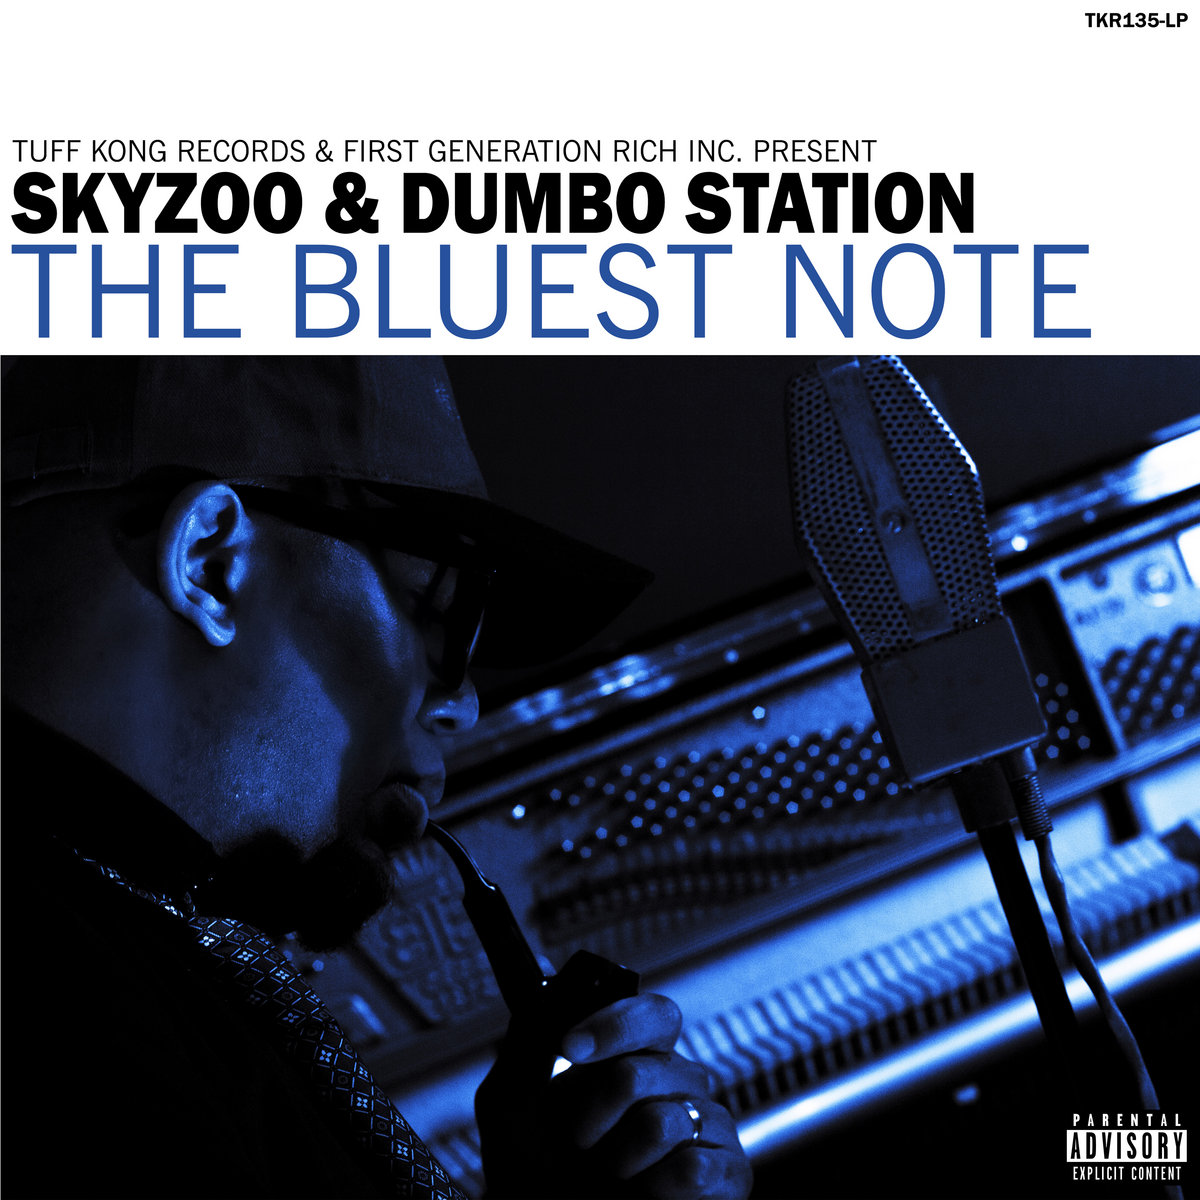 Skyzoo Dumbo station- The Bluest Note